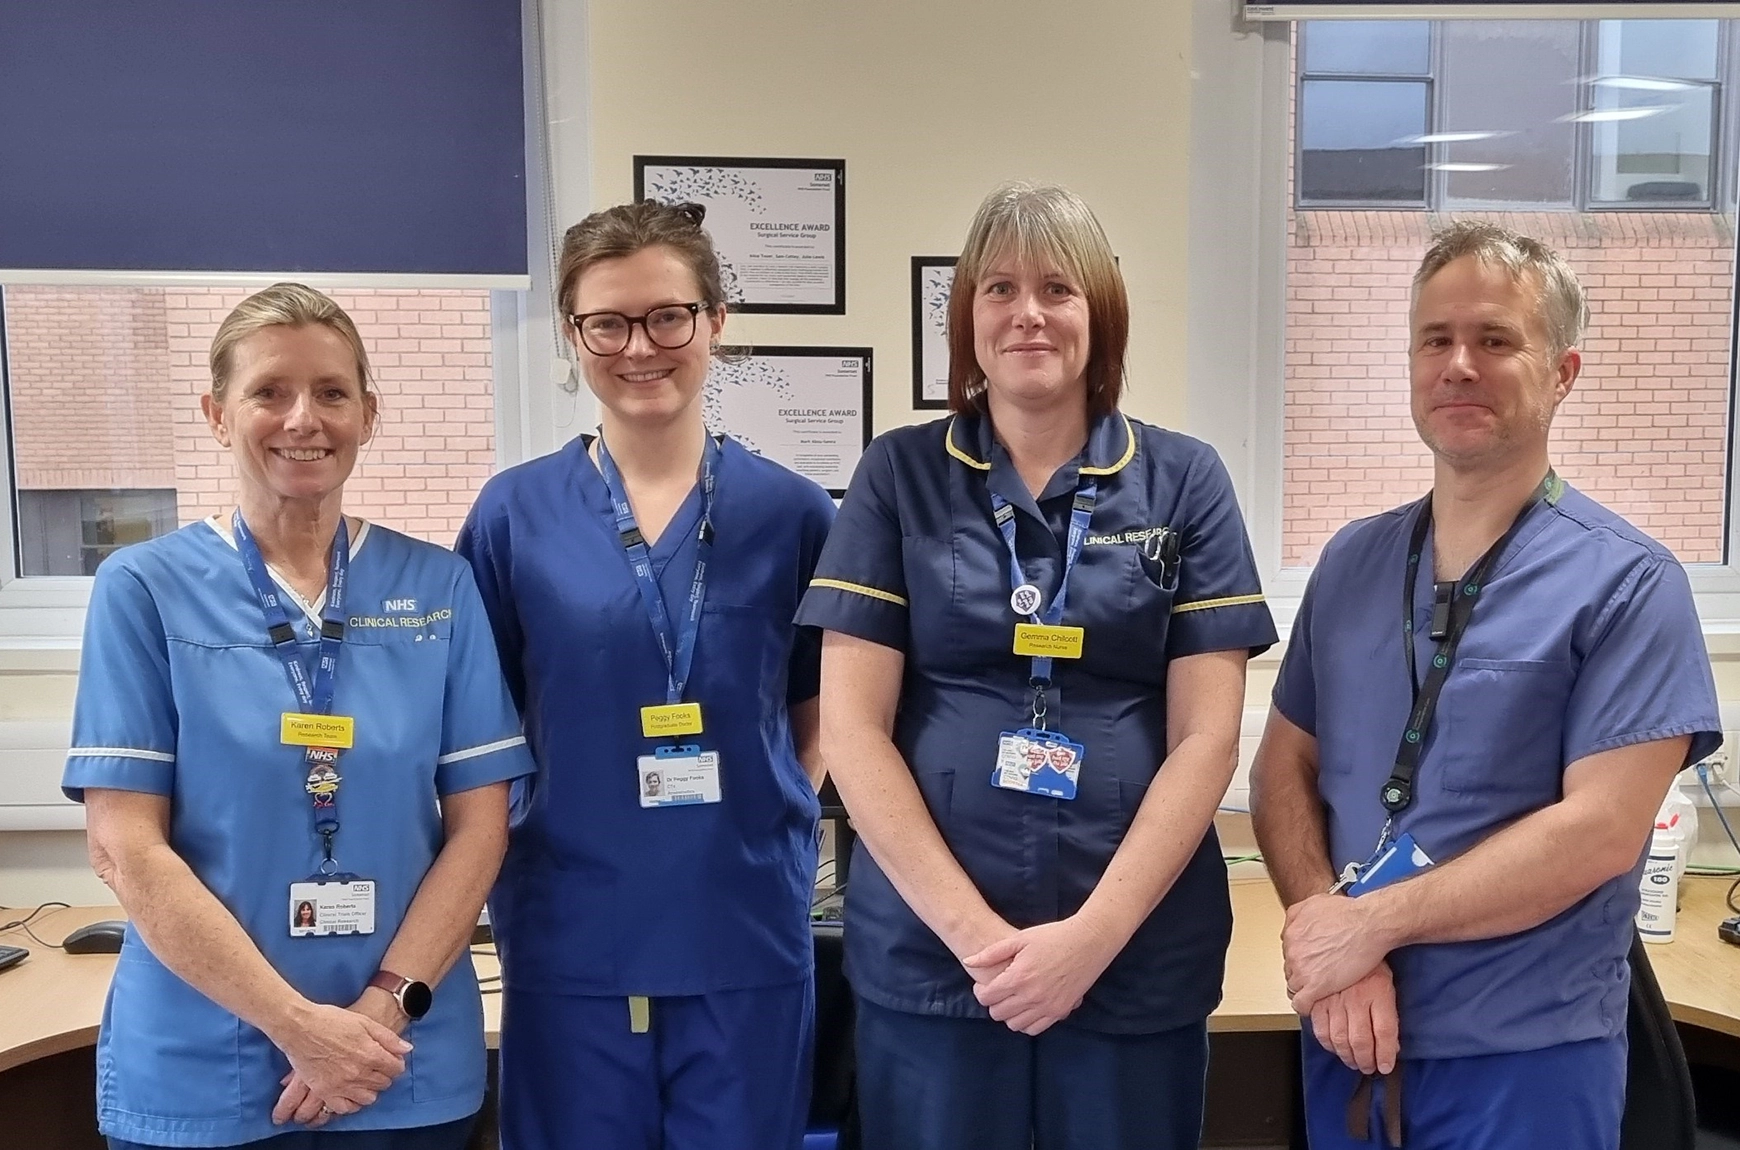 The Musgrove Park Hospital team is pictured (left to right): Karen Roberts - clinical trials officer and wellbeing champion, Dr Peggy Fooks - CT4 in anaesthetics, Gemma Chilcott - clinical research nurse, Dr Tom Teare - consultant anaesthetist